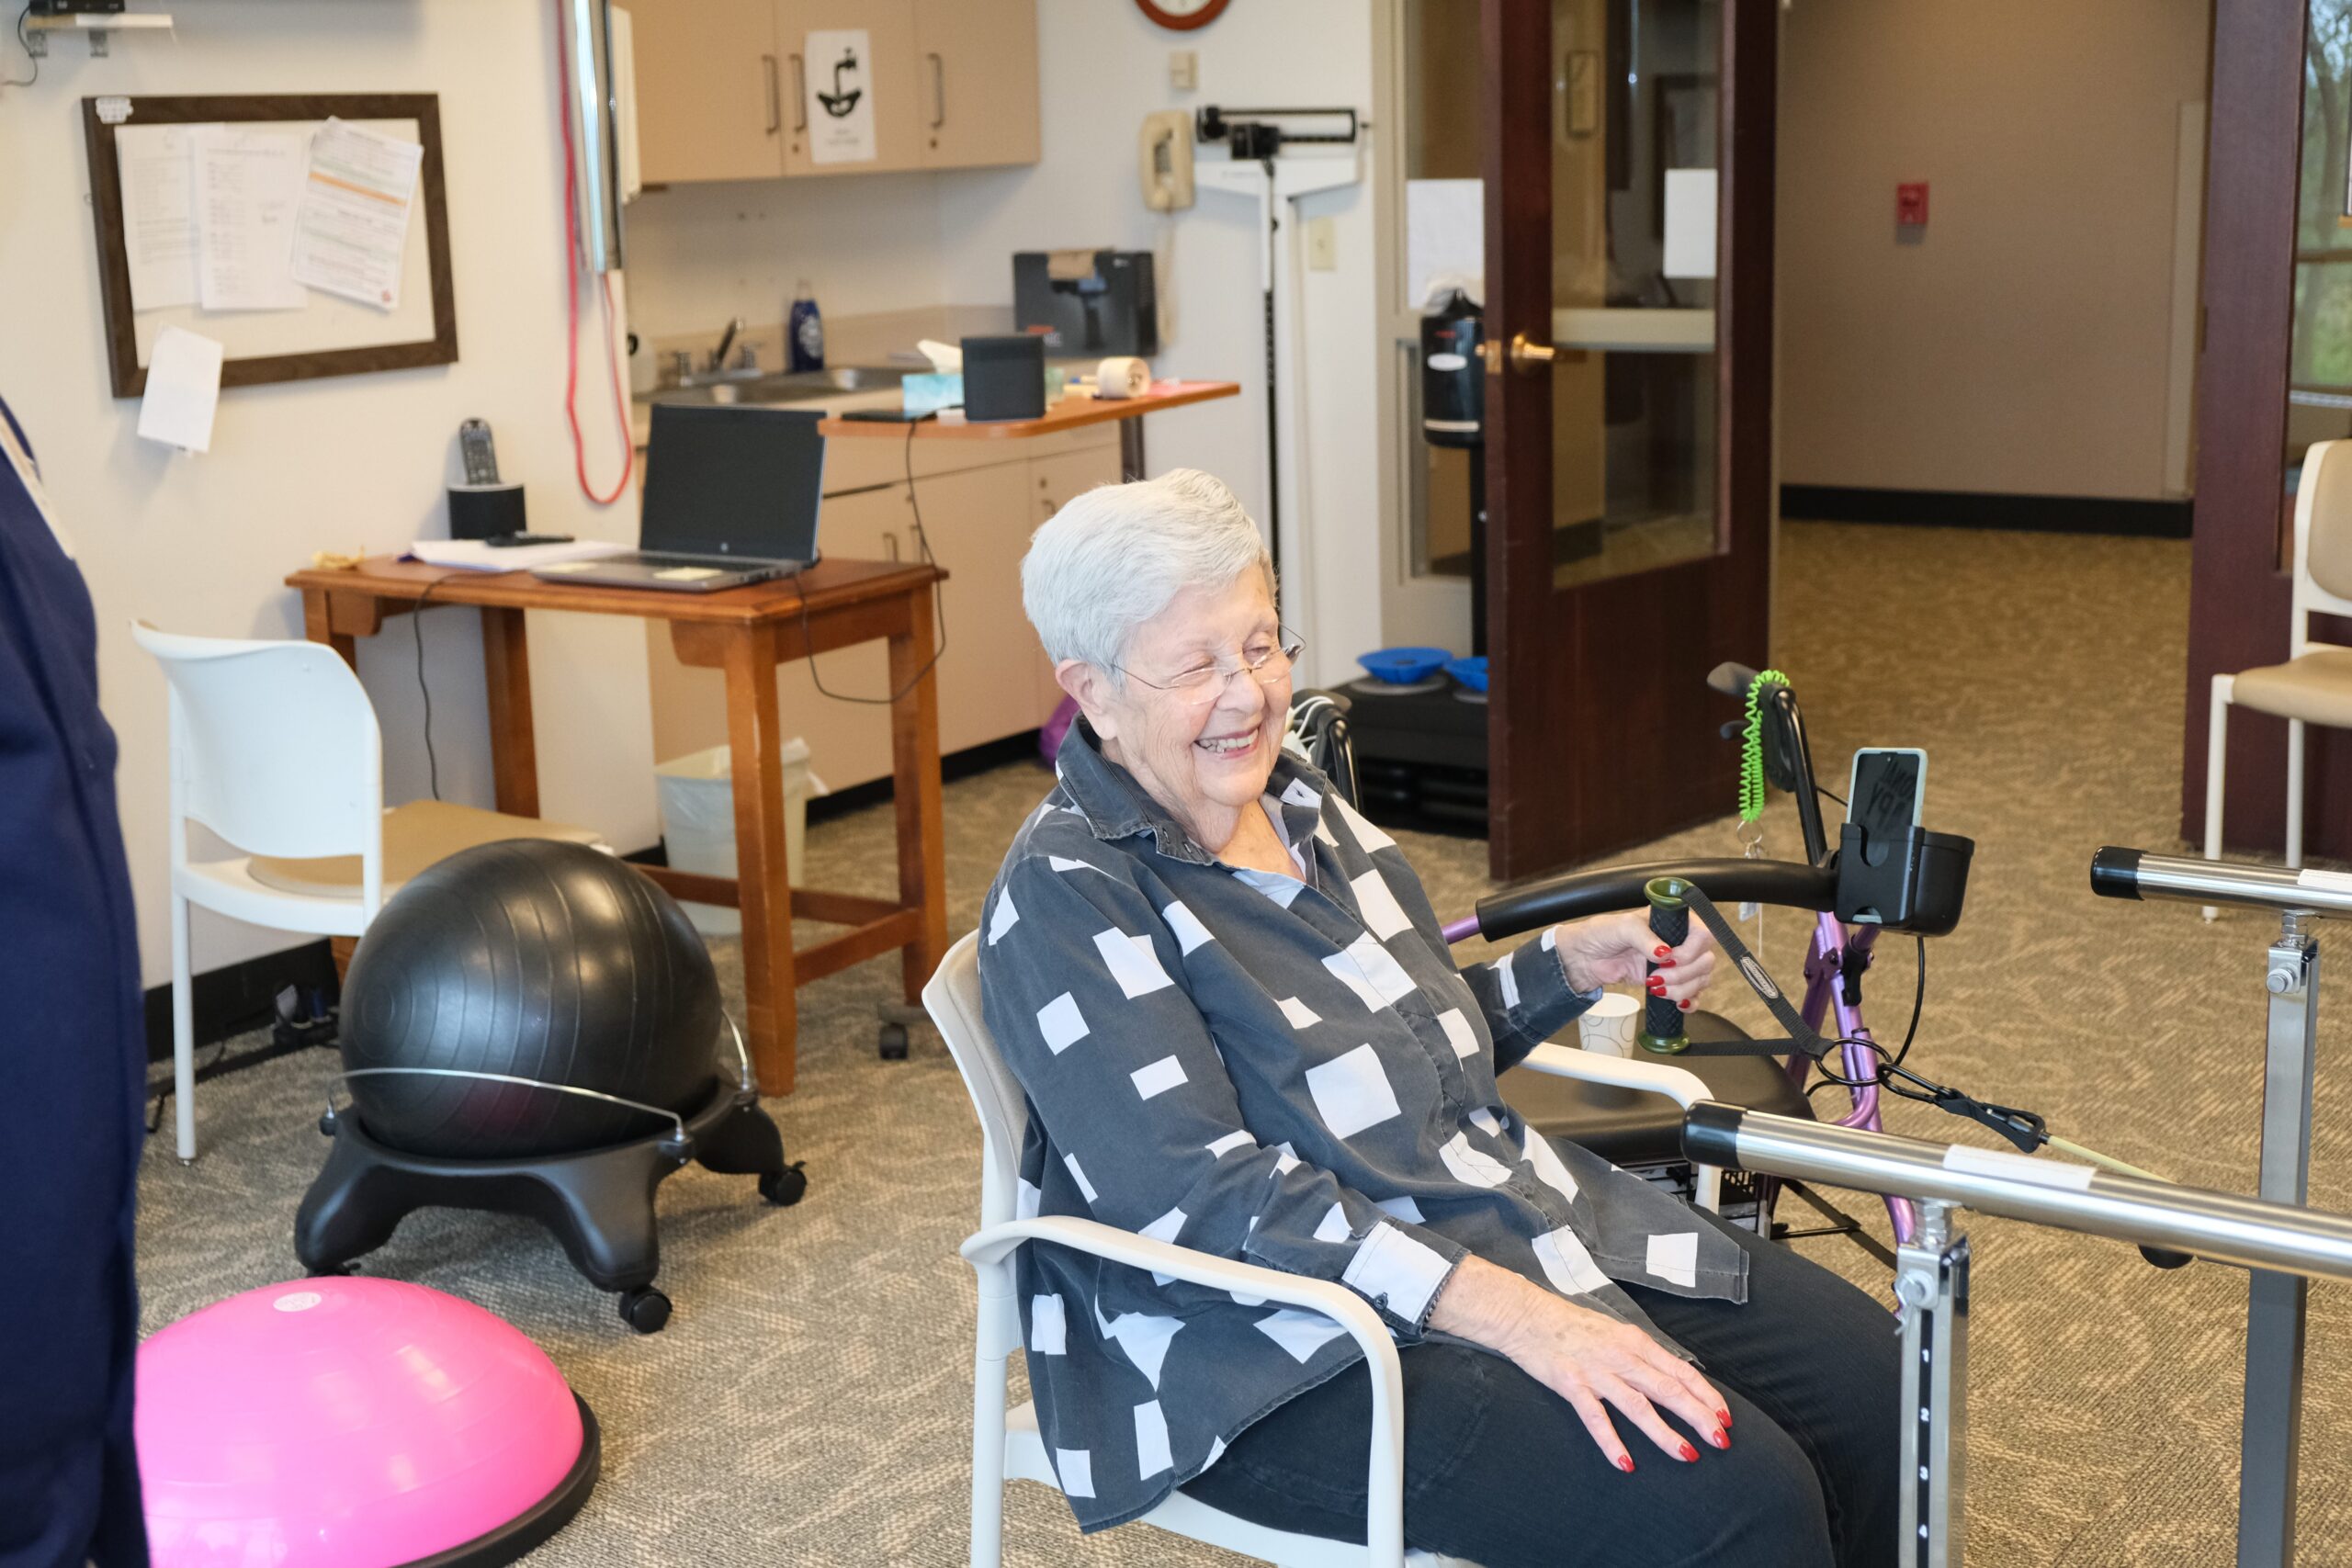 resident laughing while sitting in a therapy room surrounded by exercise equipment